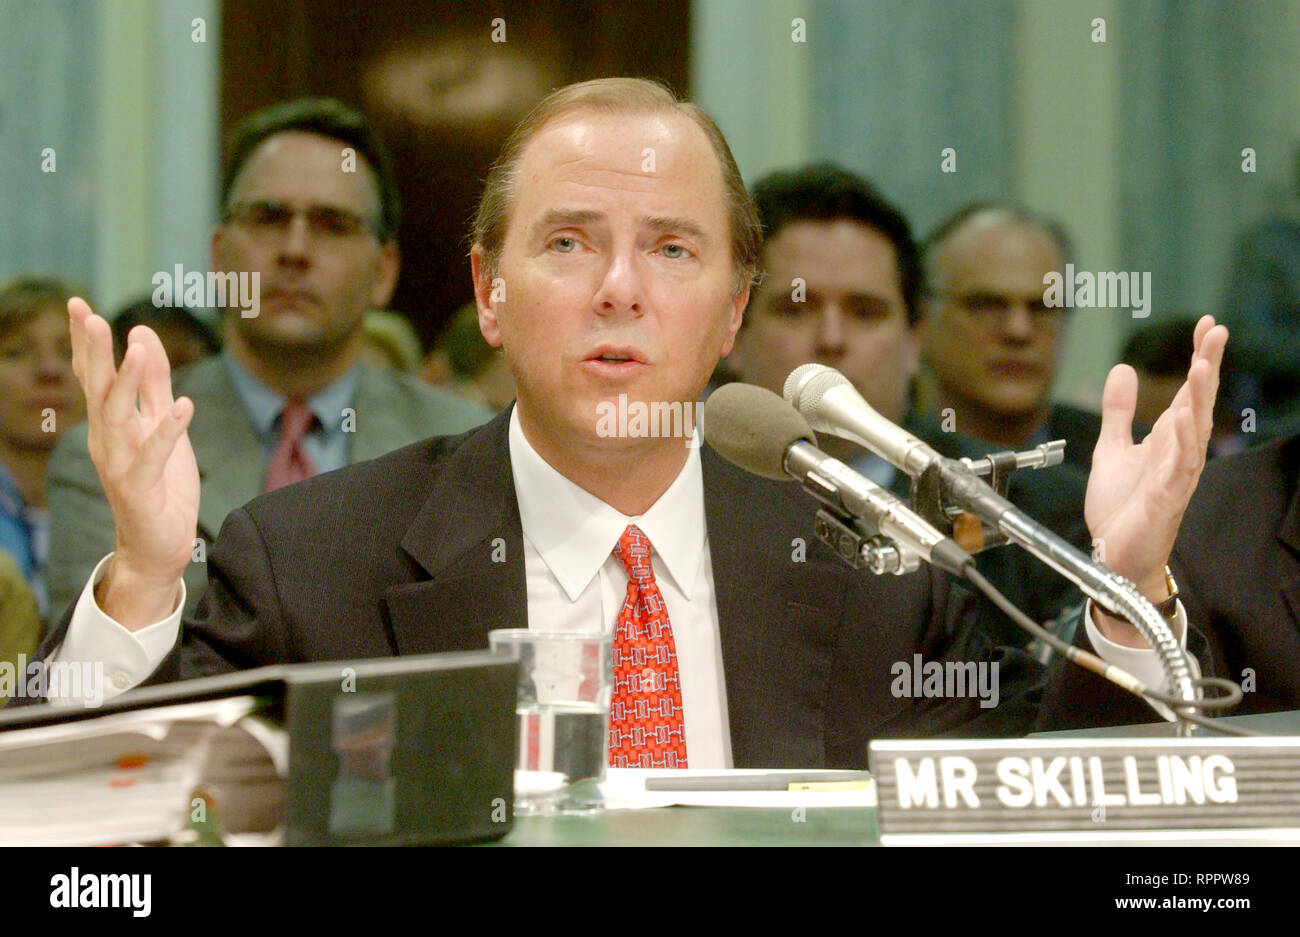 Washington, District of Columbia, USA. 18th Oct, 2009. Washington, DC - February 26, 2002 -- Testimony of Jeffrey Skilling, former President and CEO, Enron Corporation, before the U.S. Senate Commerce, Science and Transportation Committee to examine certain issues with respect to the collapse of Enron Corporation Credit: Ron Sachs/CNP/ZUMA Wire/Alamy Live News Stock Photo